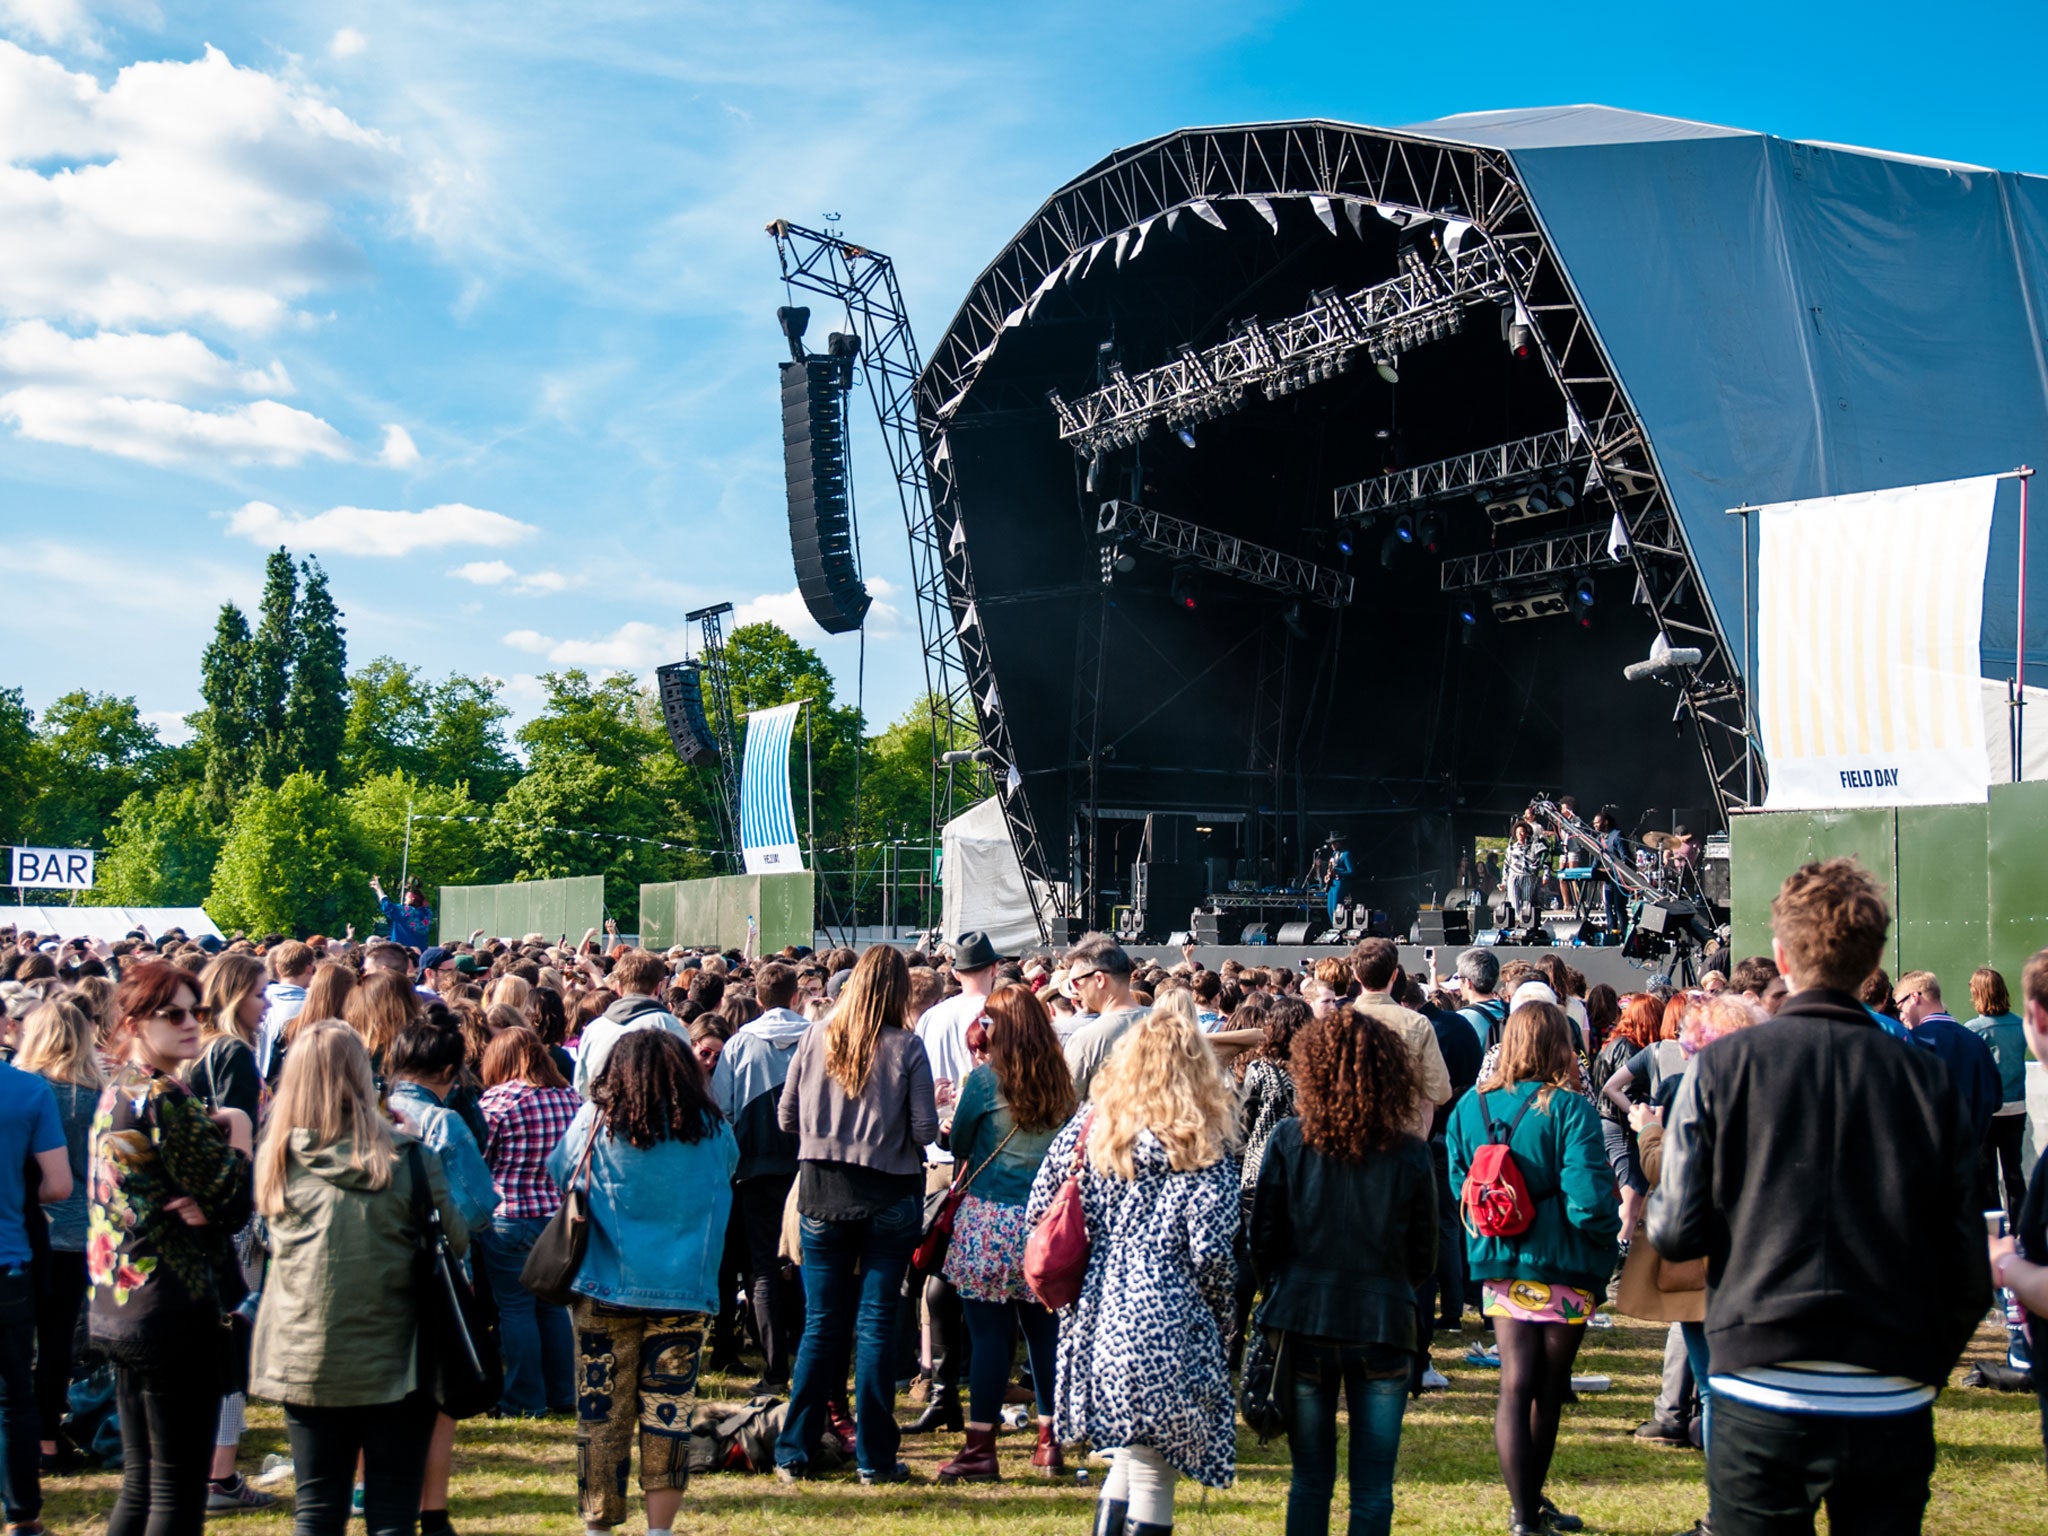 Metronomy and Pixies are already confirmed to perform at Field Day 2014